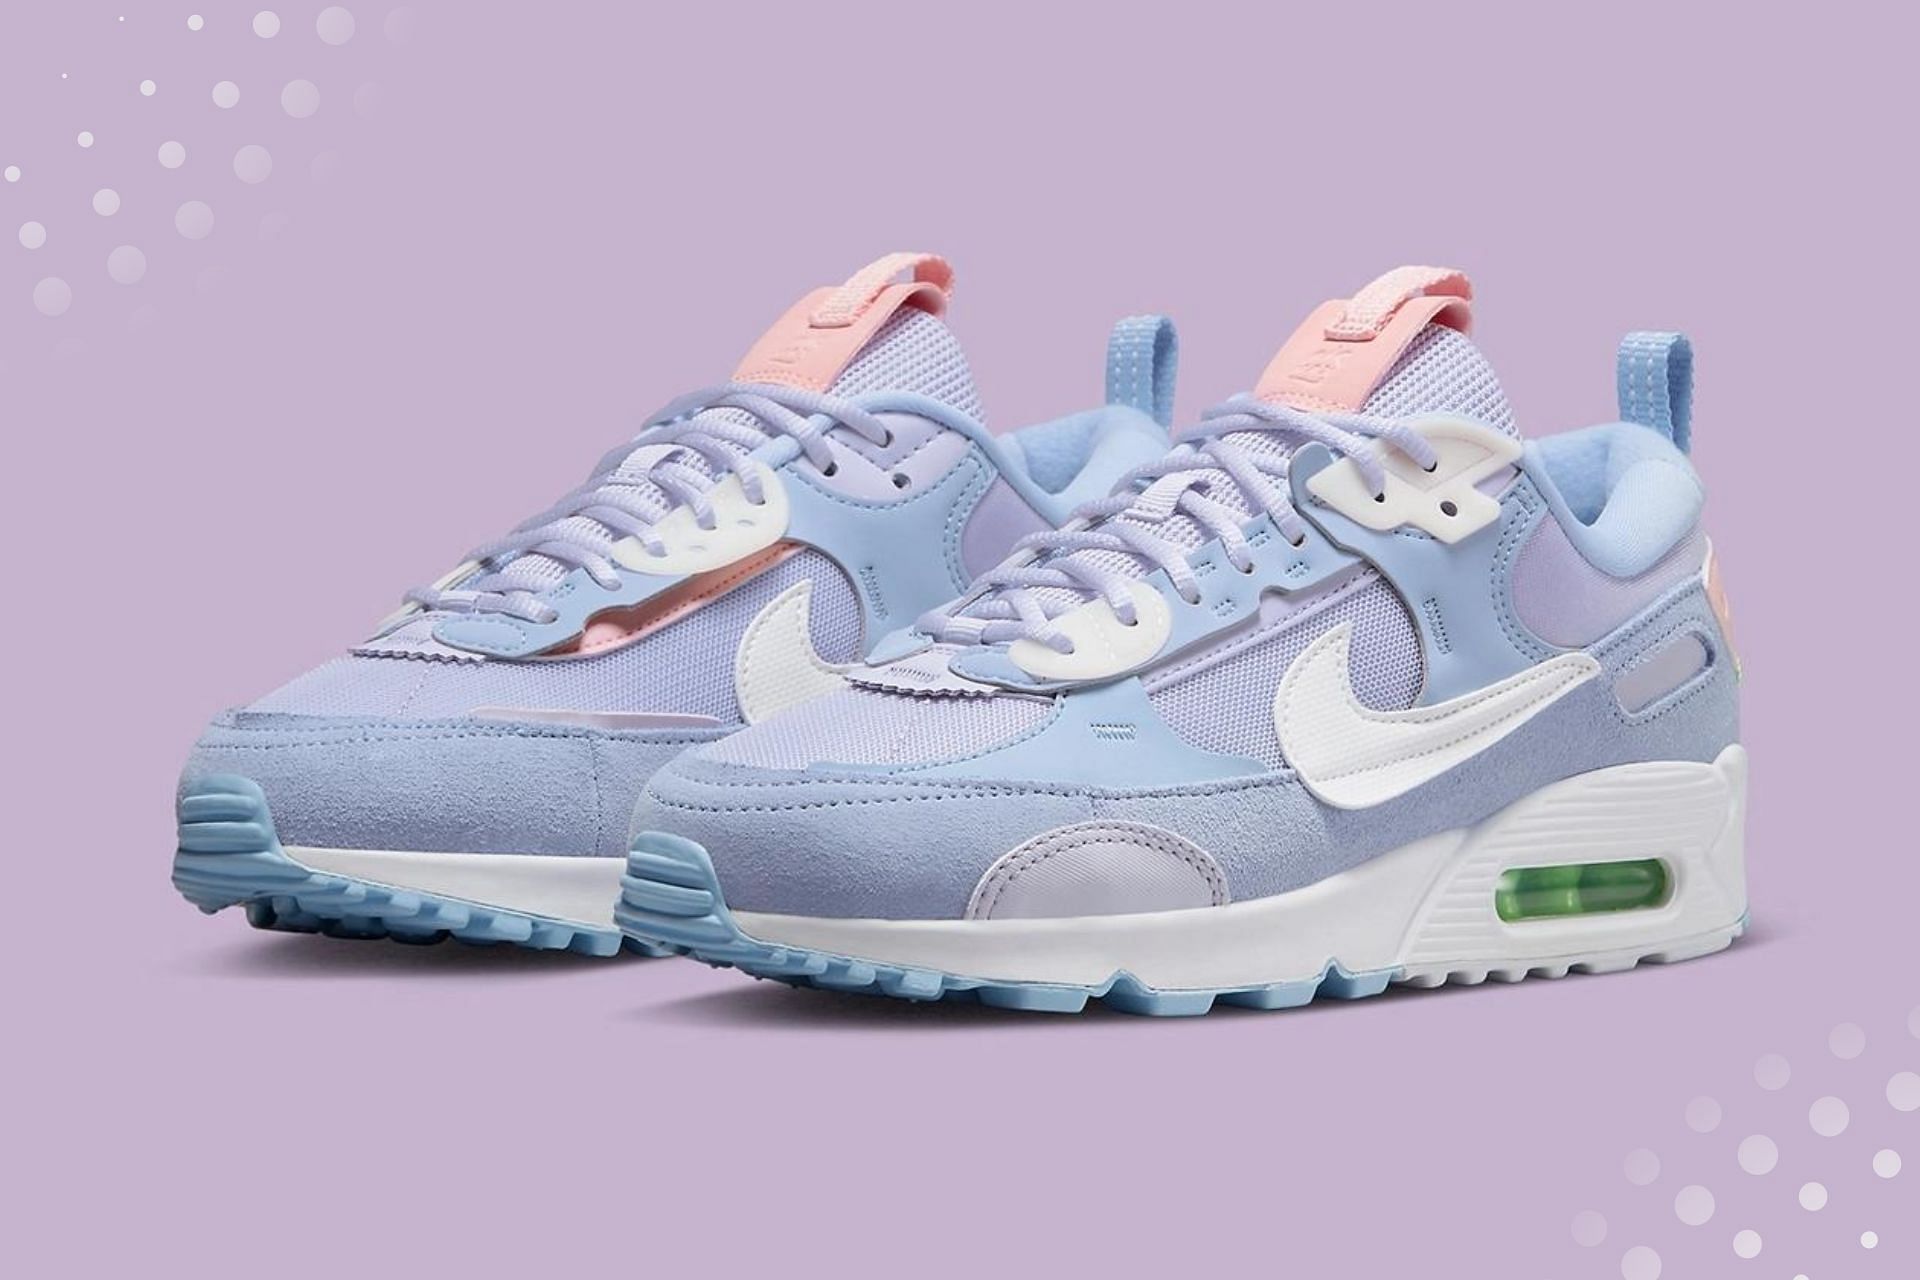 tactics a billion Berry Air Max 90 Futura: Nike Air Max 90 Futura "Easter" shoes: Where to buy and  more details explored